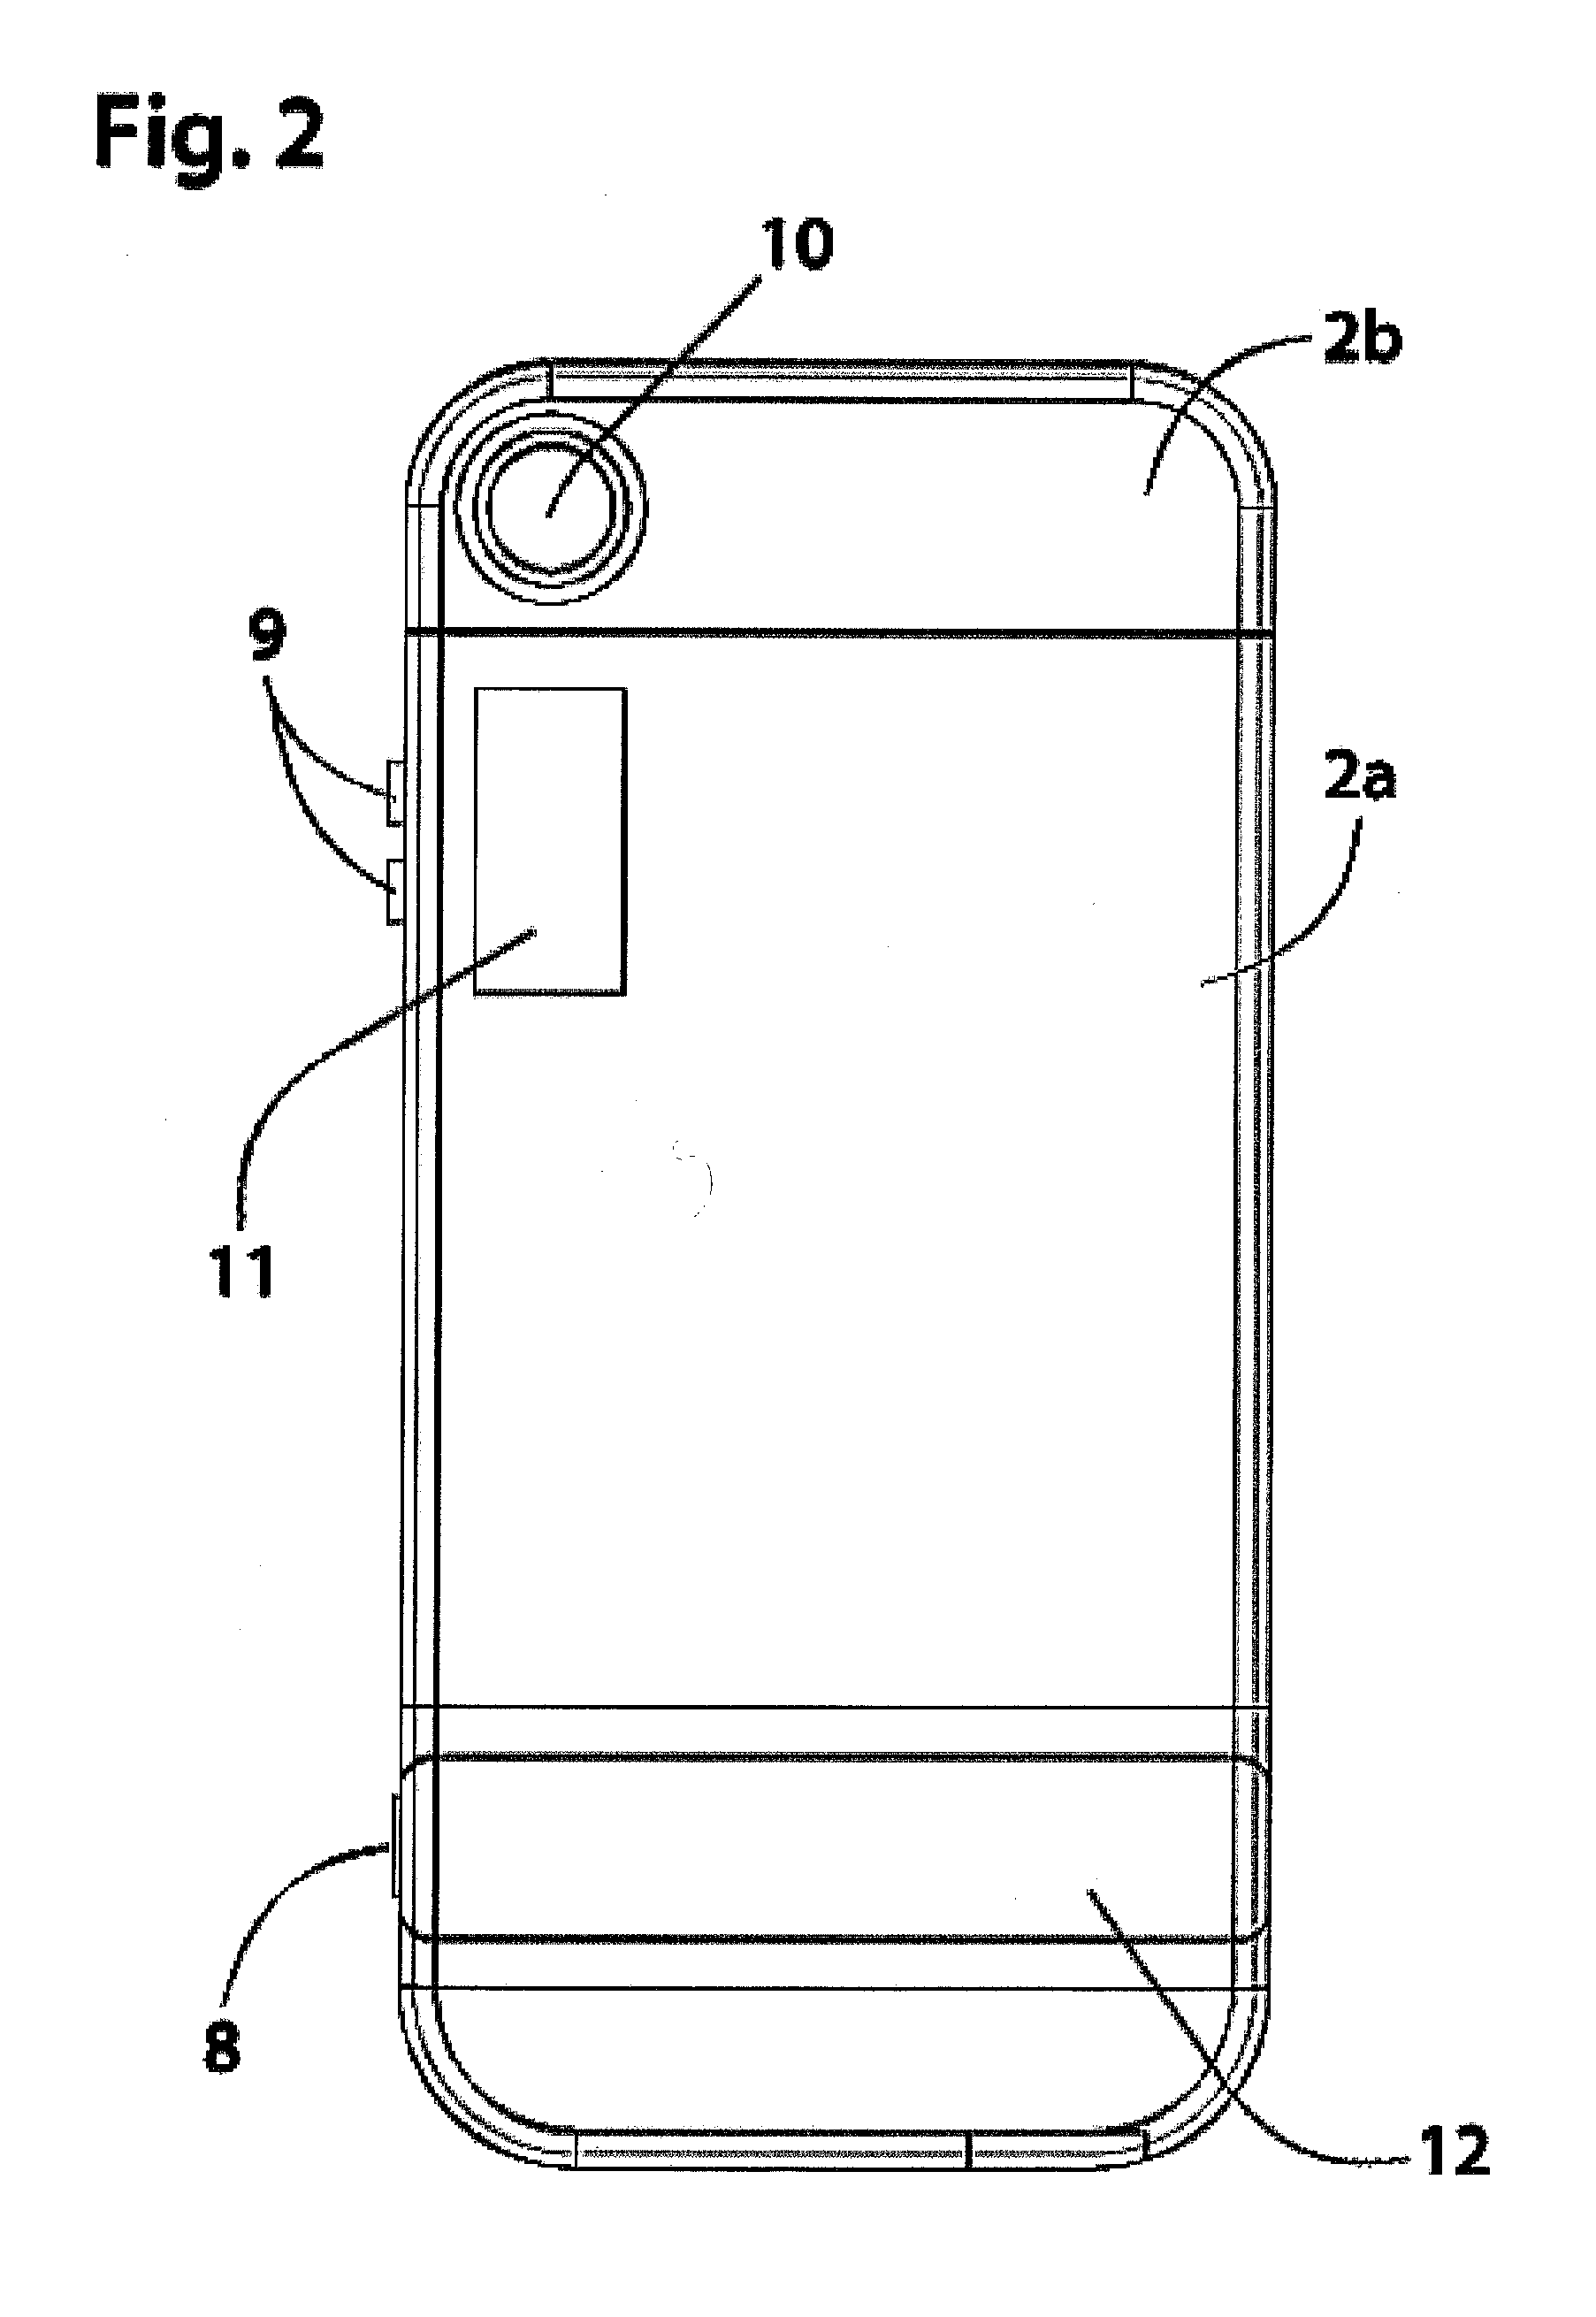 Case for mobile communication device with flash and camera controls